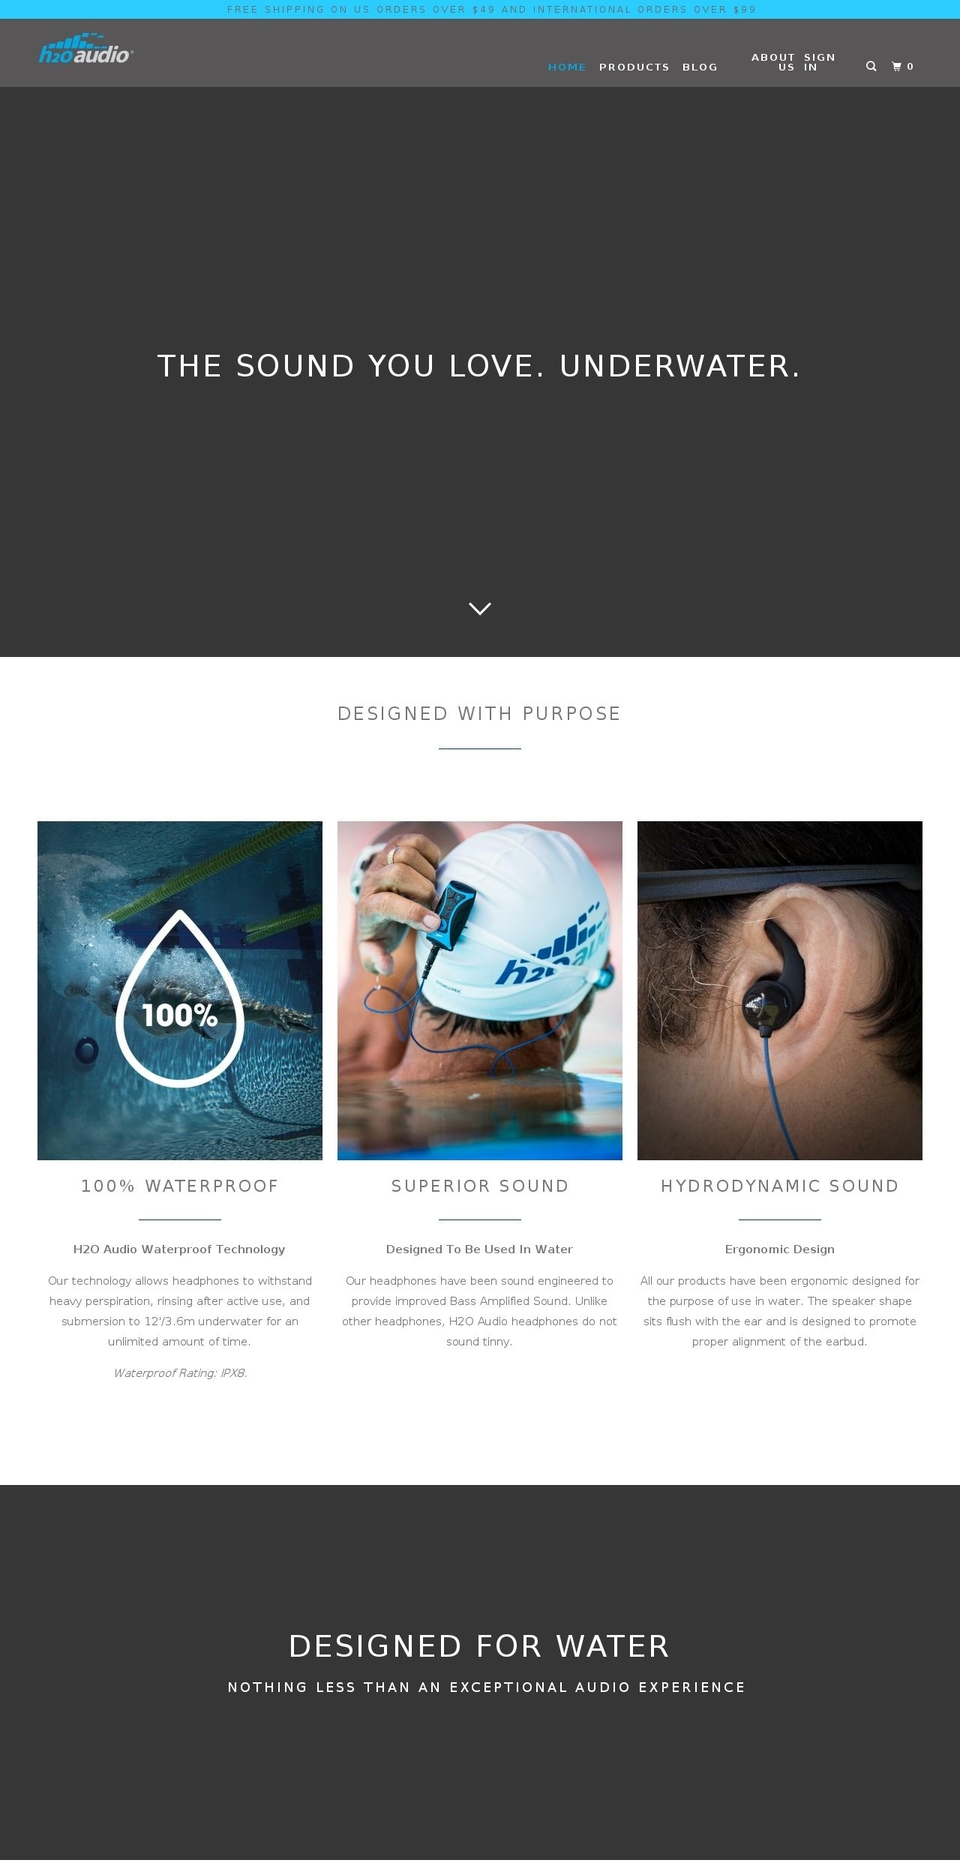 CLEAR IMAGES of Parallax-May-3-2018 Shopify theme site example h2opulse.com